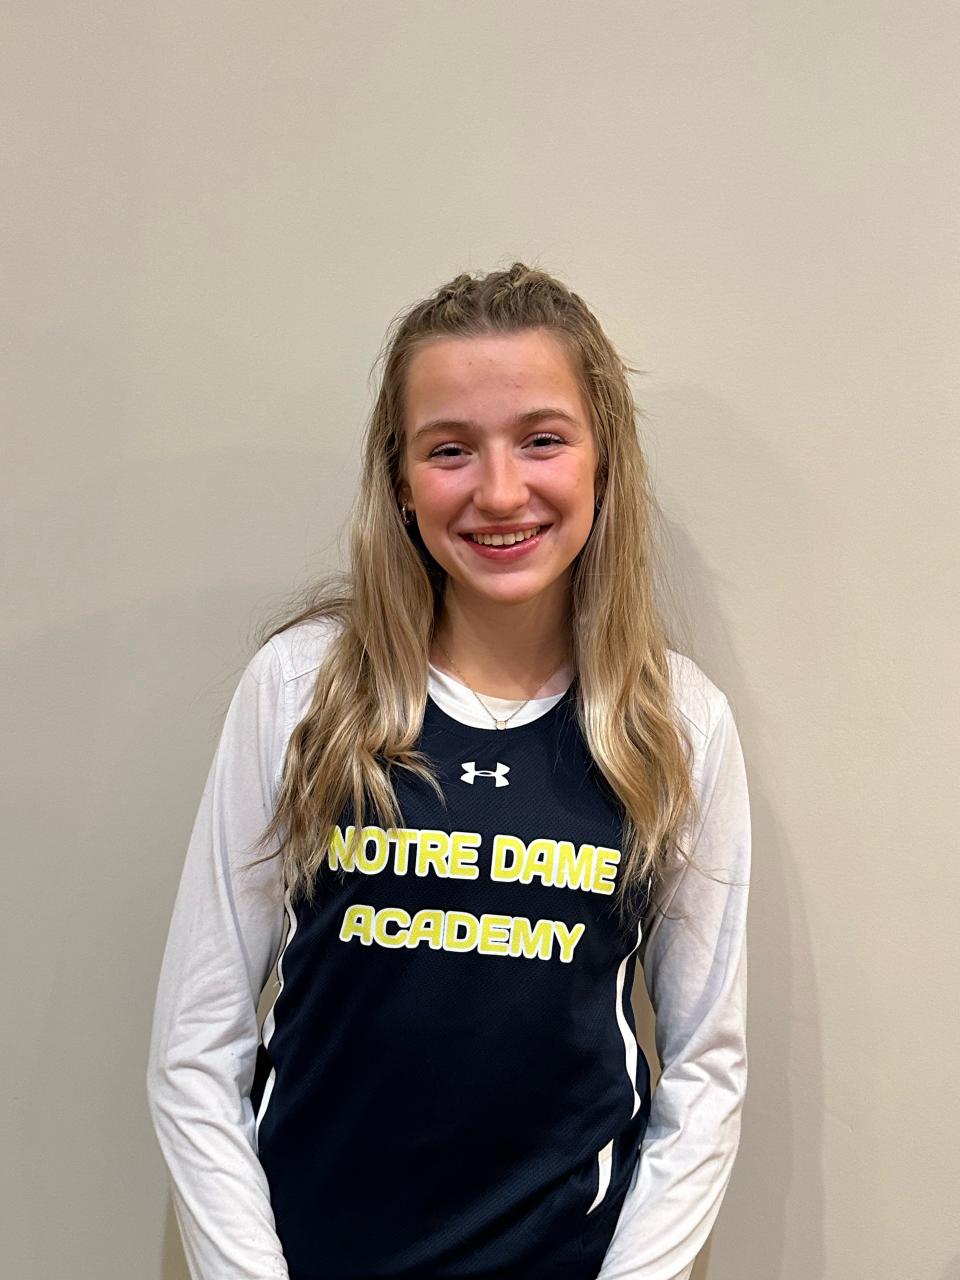 Josette Oberton of Notre Dame Academy has been named to The Patriot Ledger/Enterprise All-Scholastic Girls Cross Country Team.